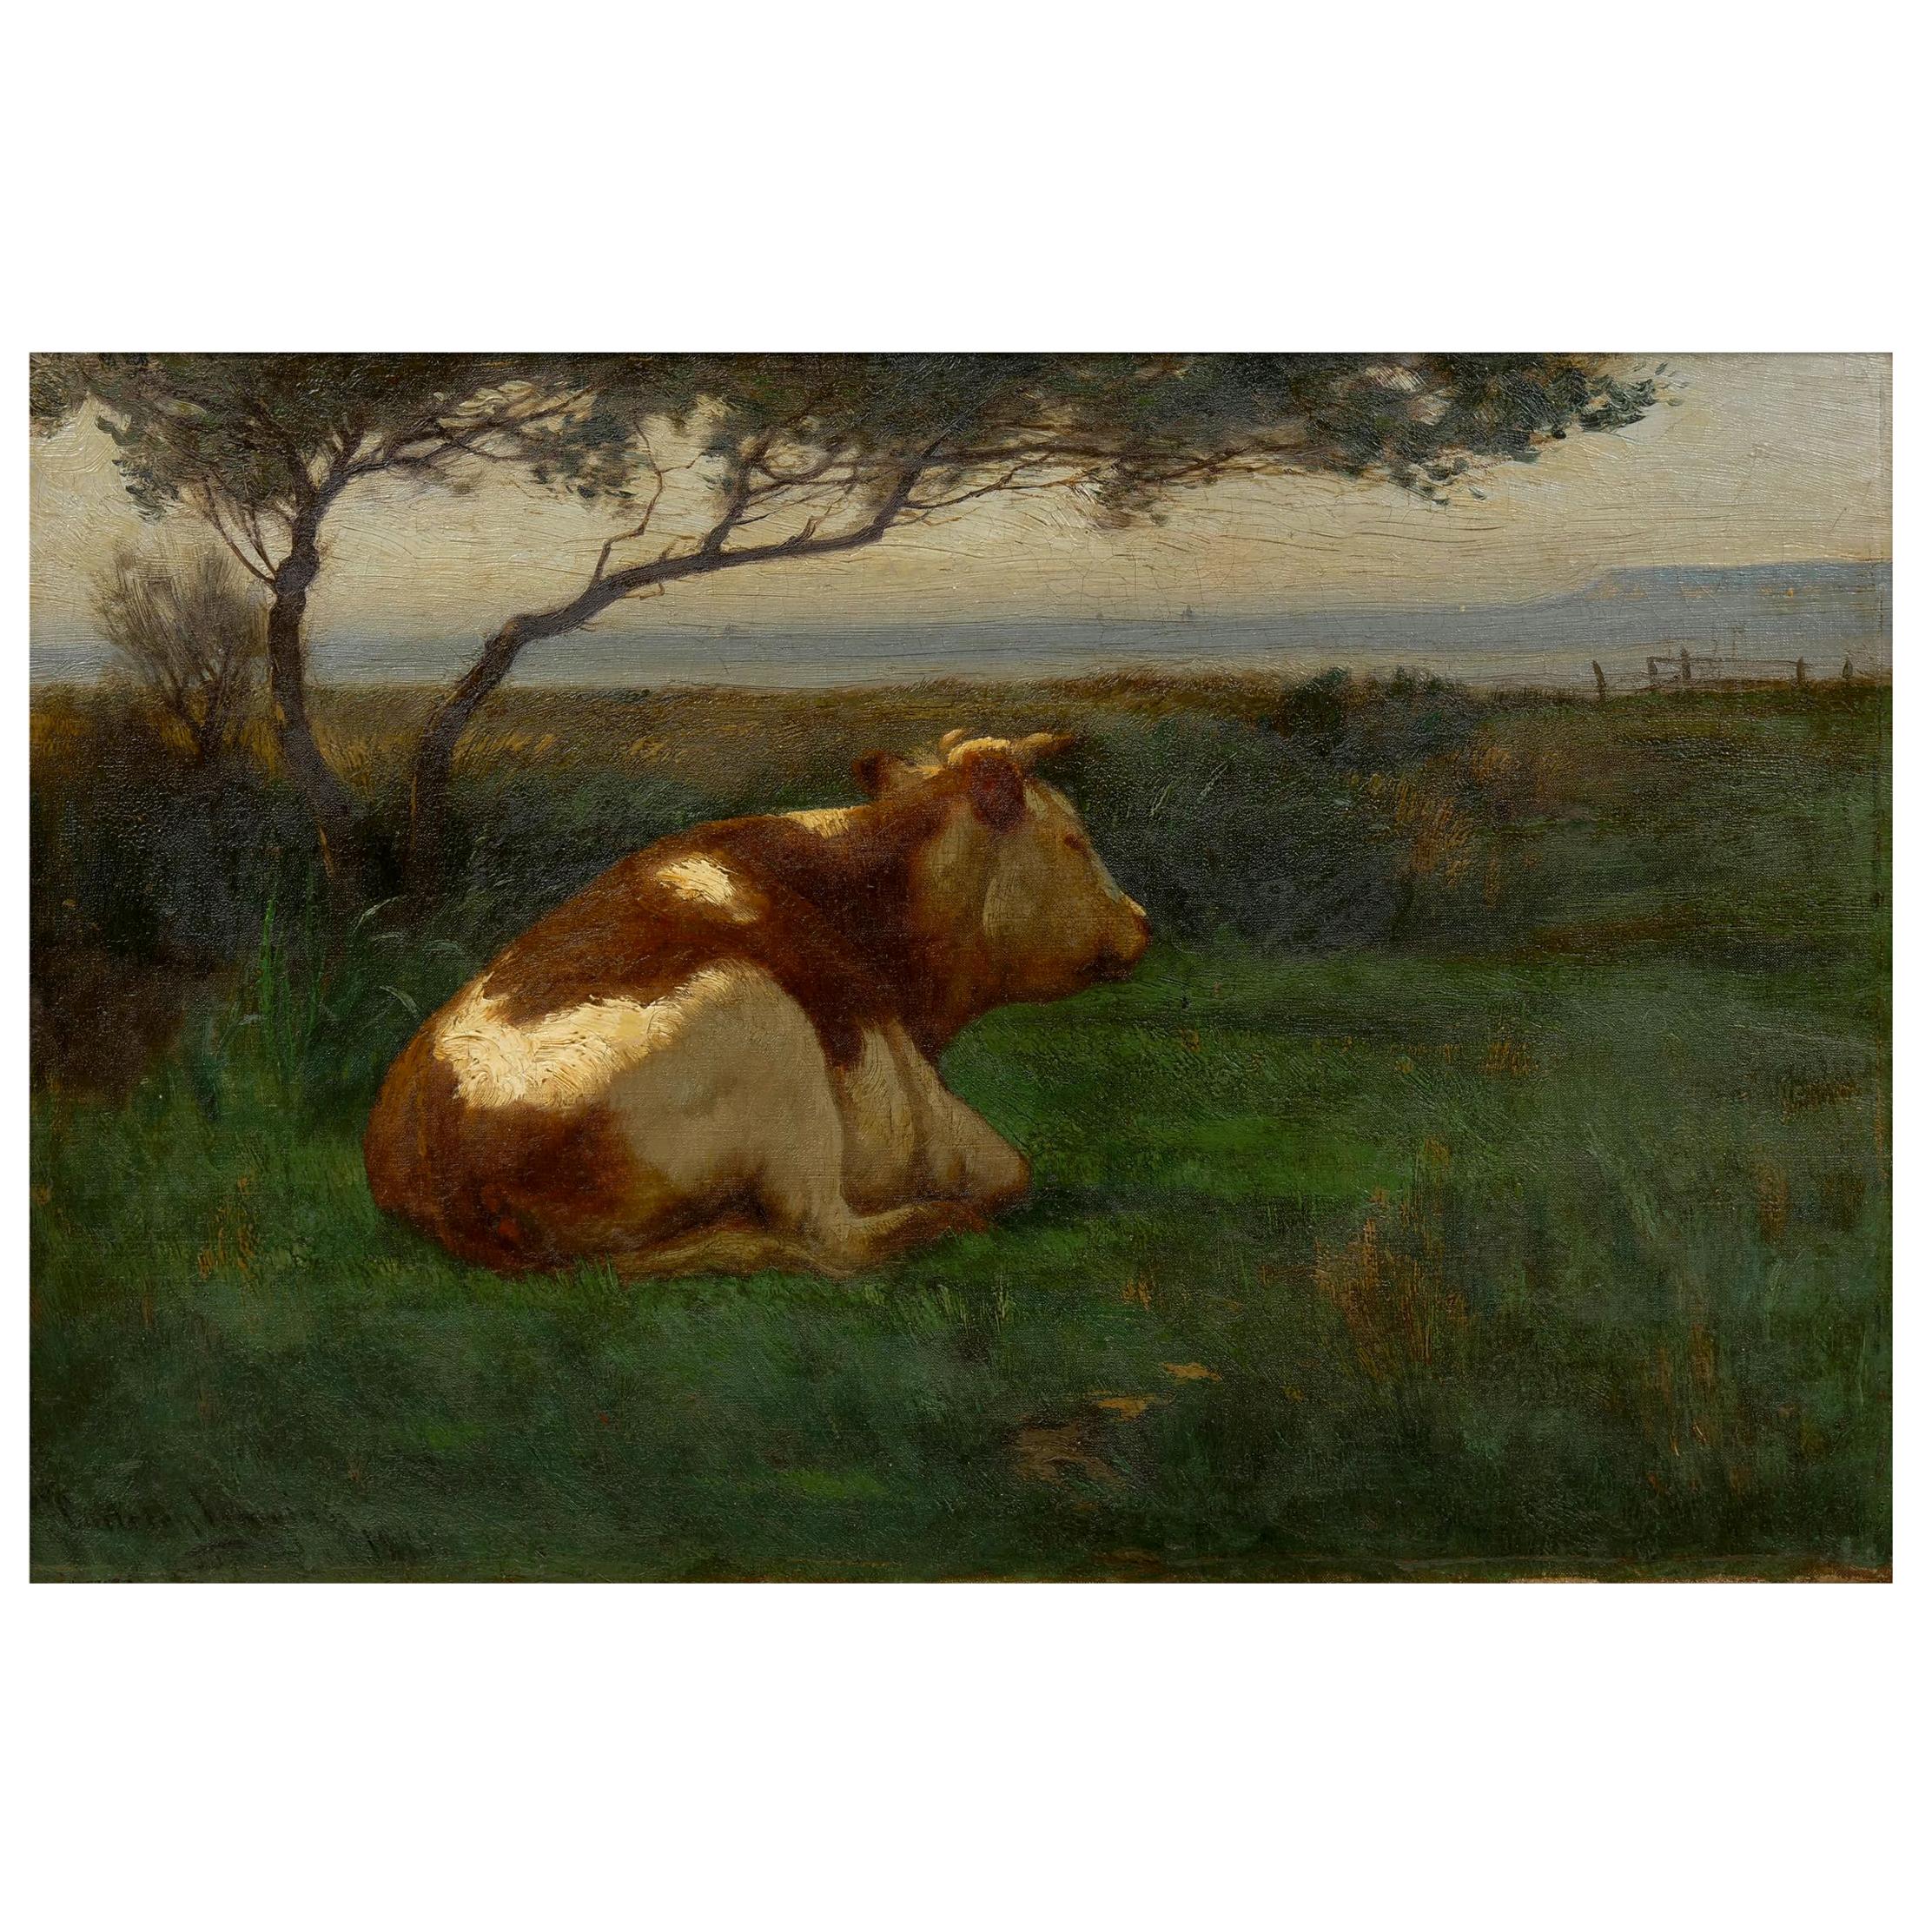 “Landscape of a Resting Bull” Oil Painting by John Carleton Wiggins